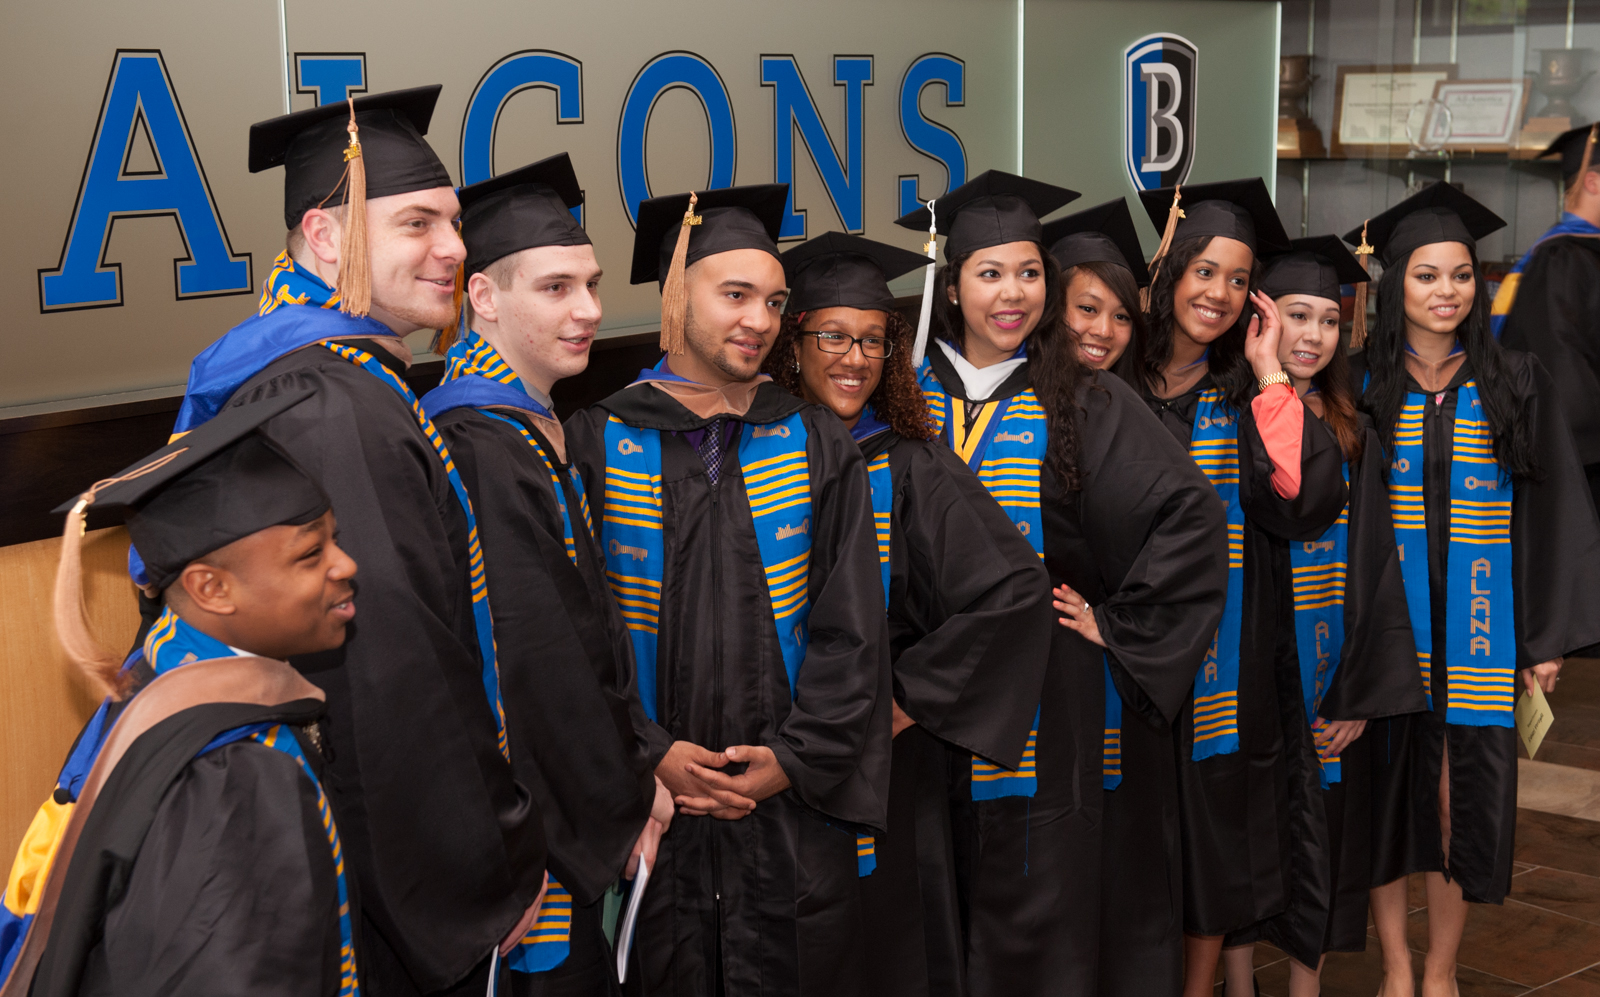 Students in cap and gown